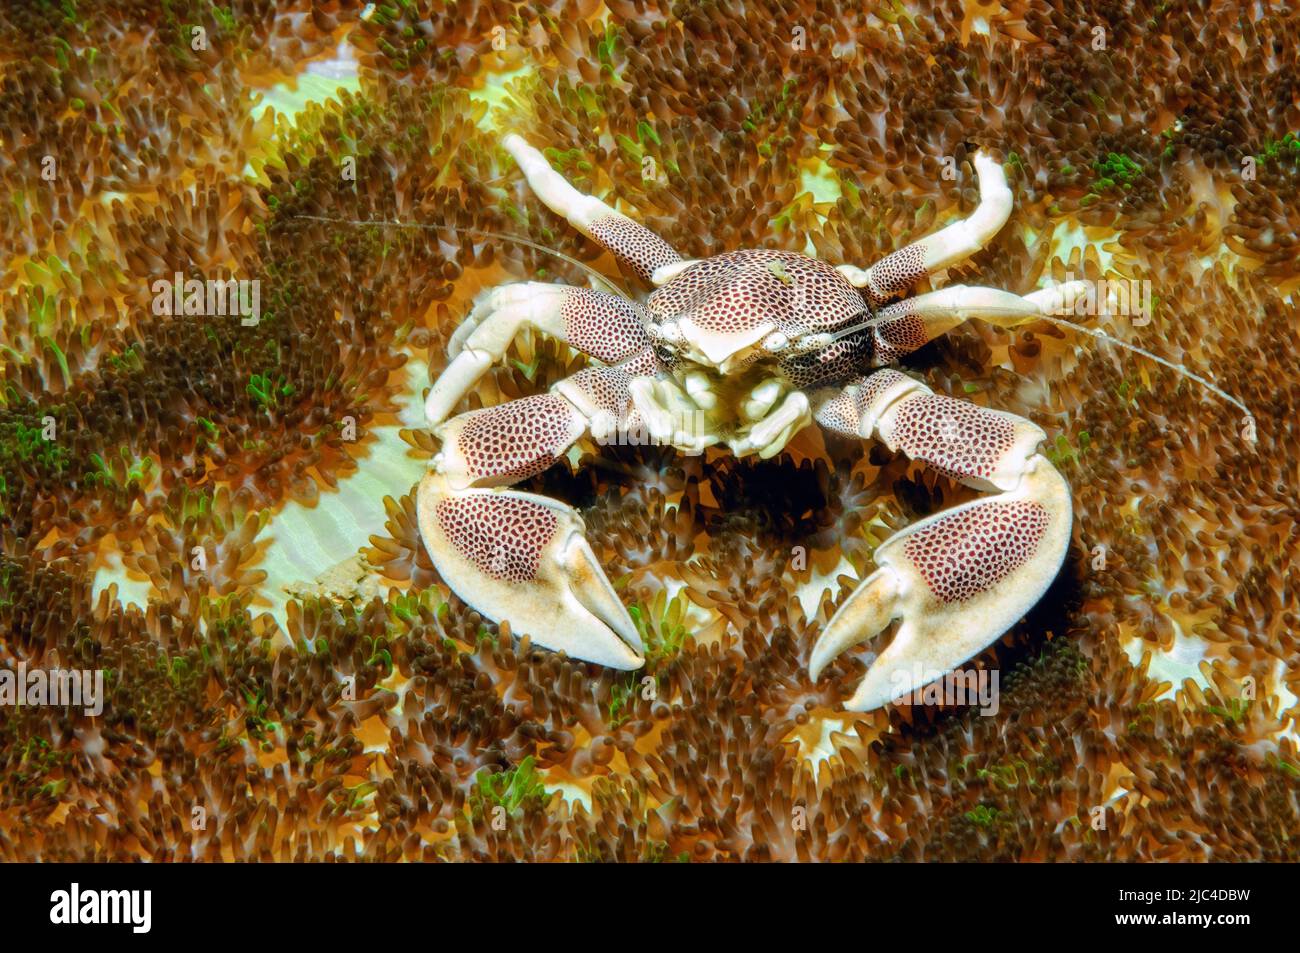 Close-up of spotted porcelain crab (Neopetrolisthes maculatus) in sea anemone mertens' carpet sea anemone (Stichodactyla mertensii), Indian Ocean Stock Photo